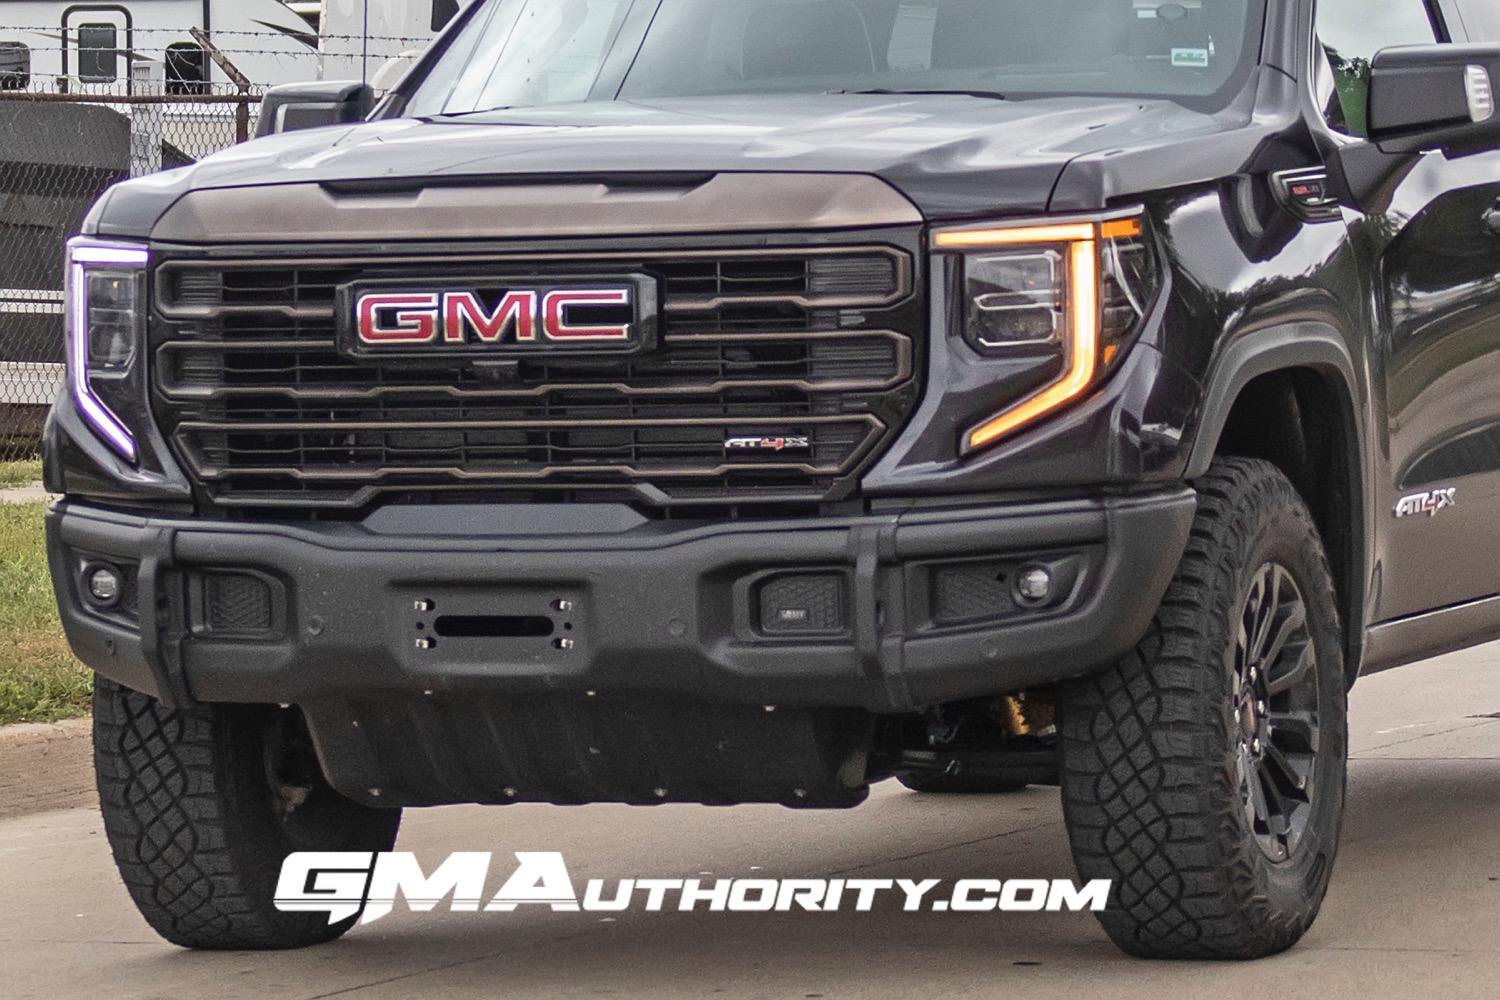 2023 GMC Sierra AT4X, AEV Edition Configurator Now Live